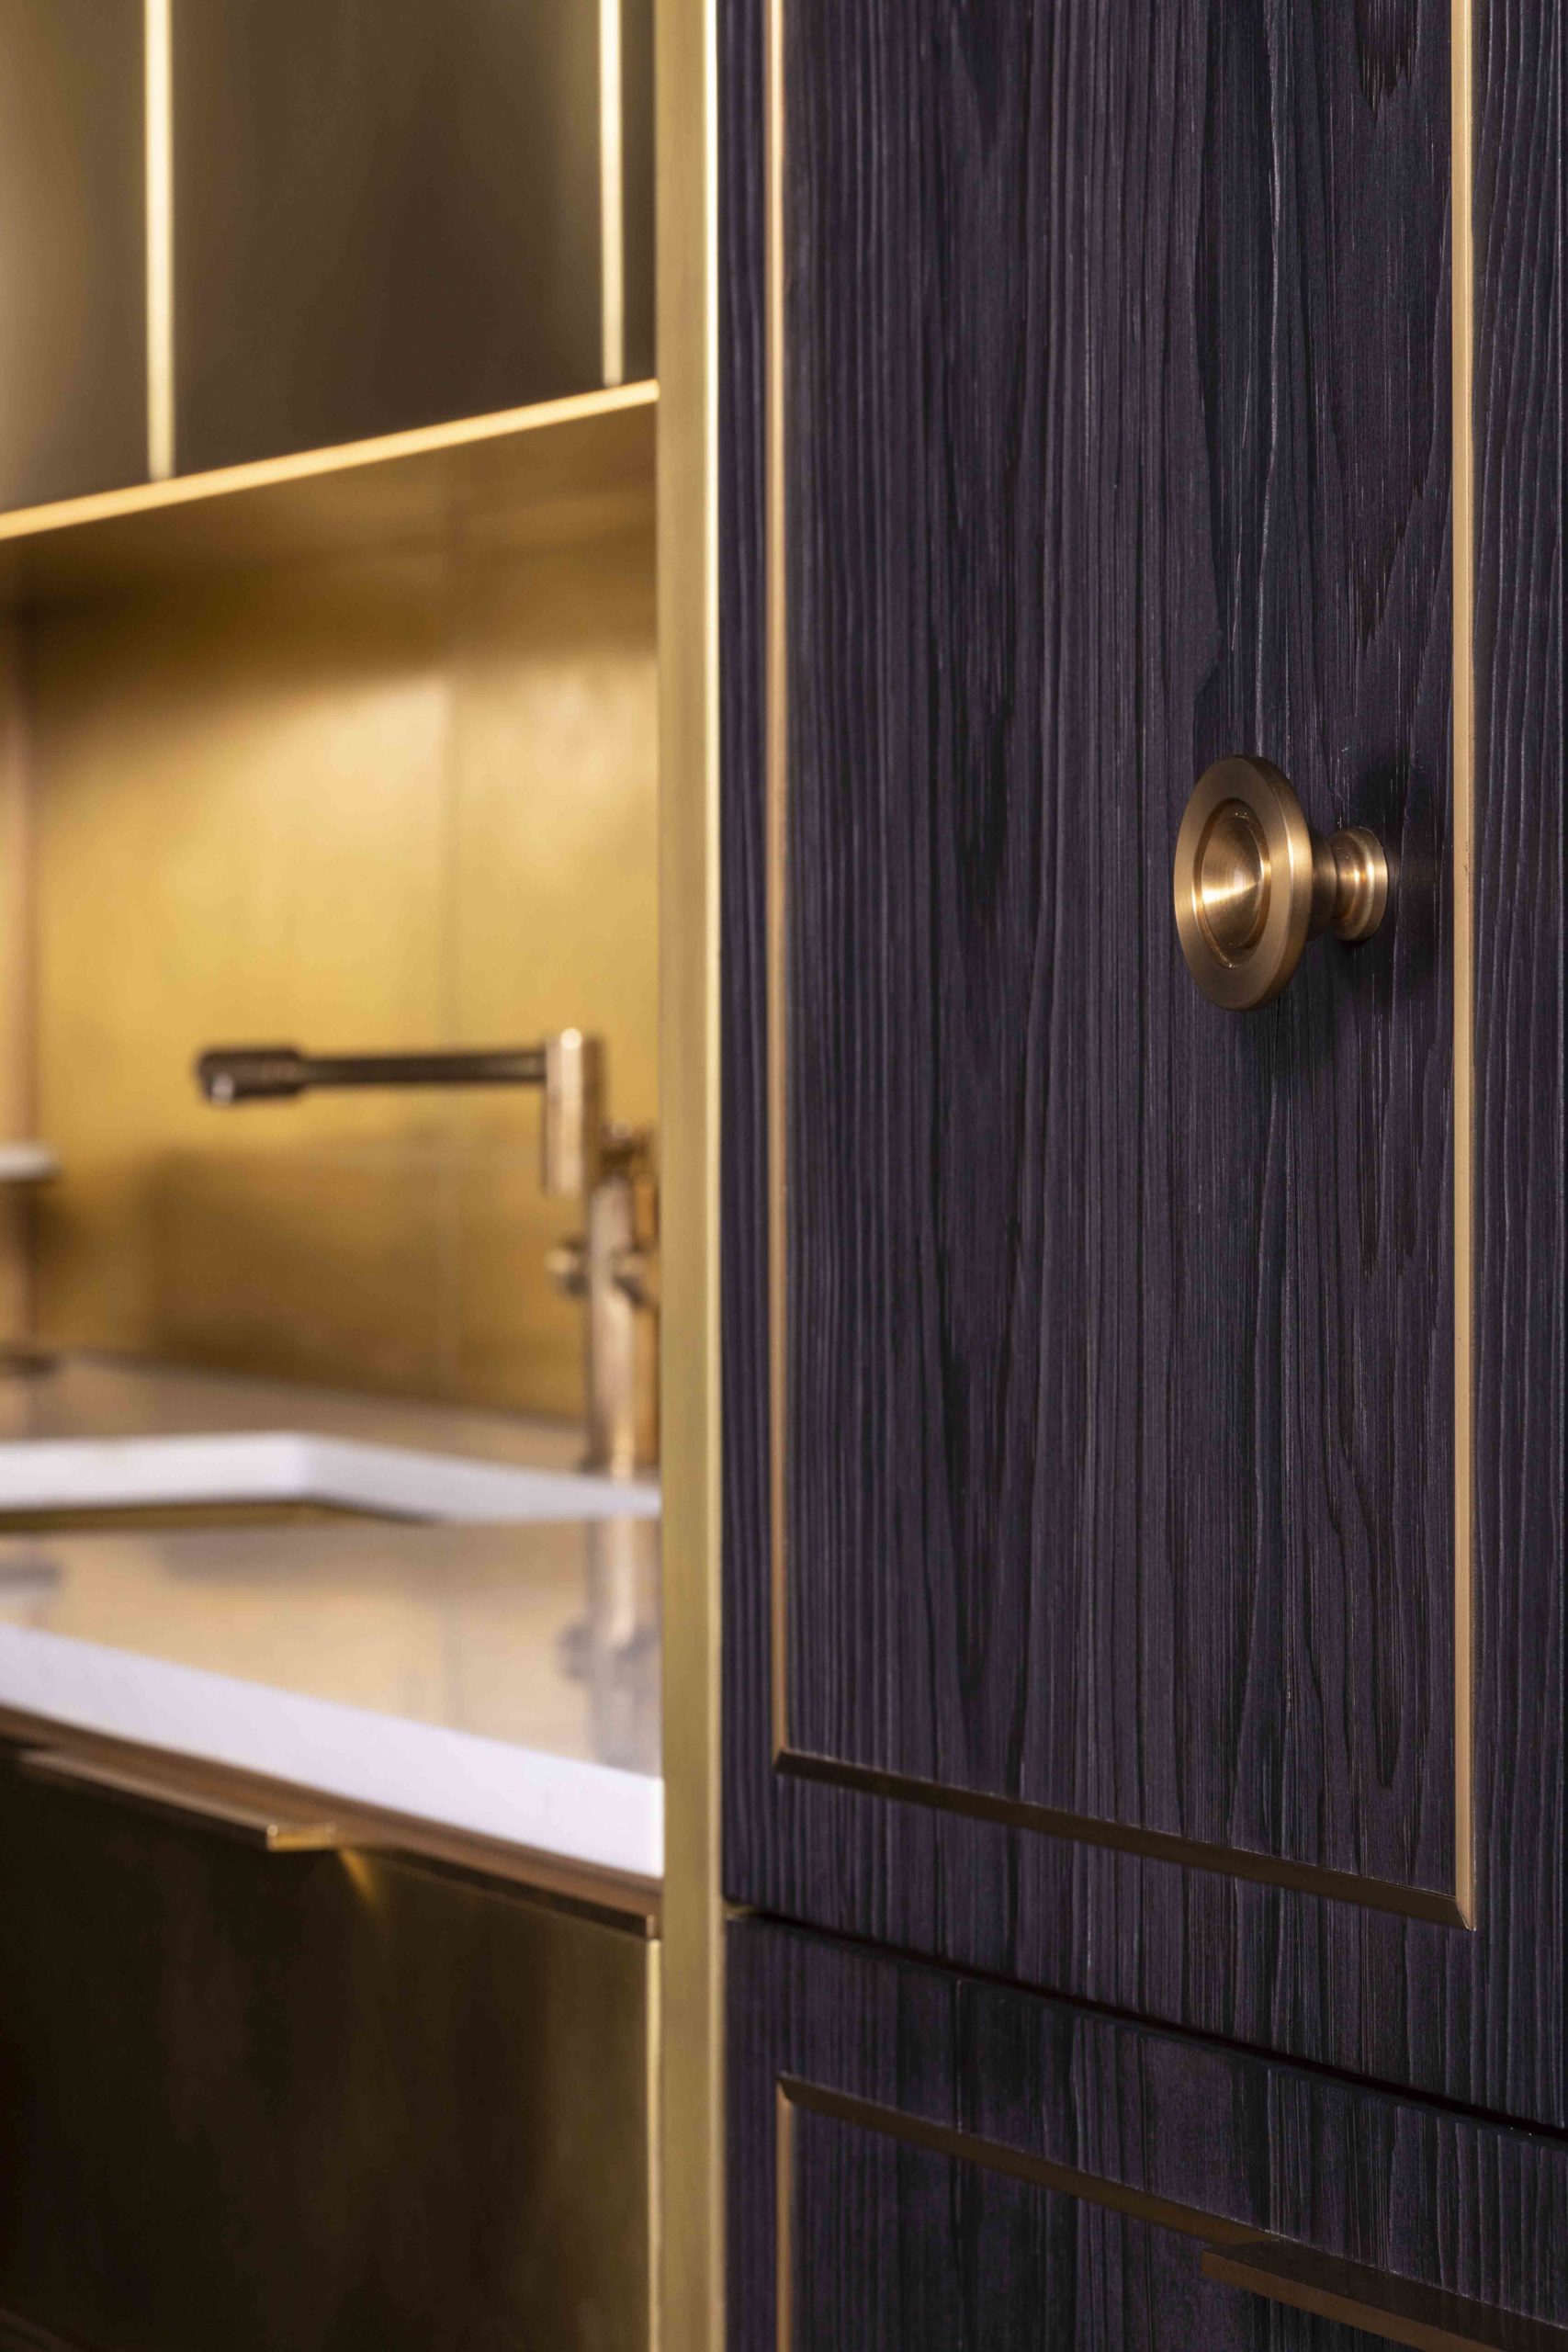 amuneal_products_WNWN_NYDC_4NYC-2019-Brass-Kitchen-Charred-pine-pantry-door-detail-5-nycsshowroom_nov19_0109-scaled-1